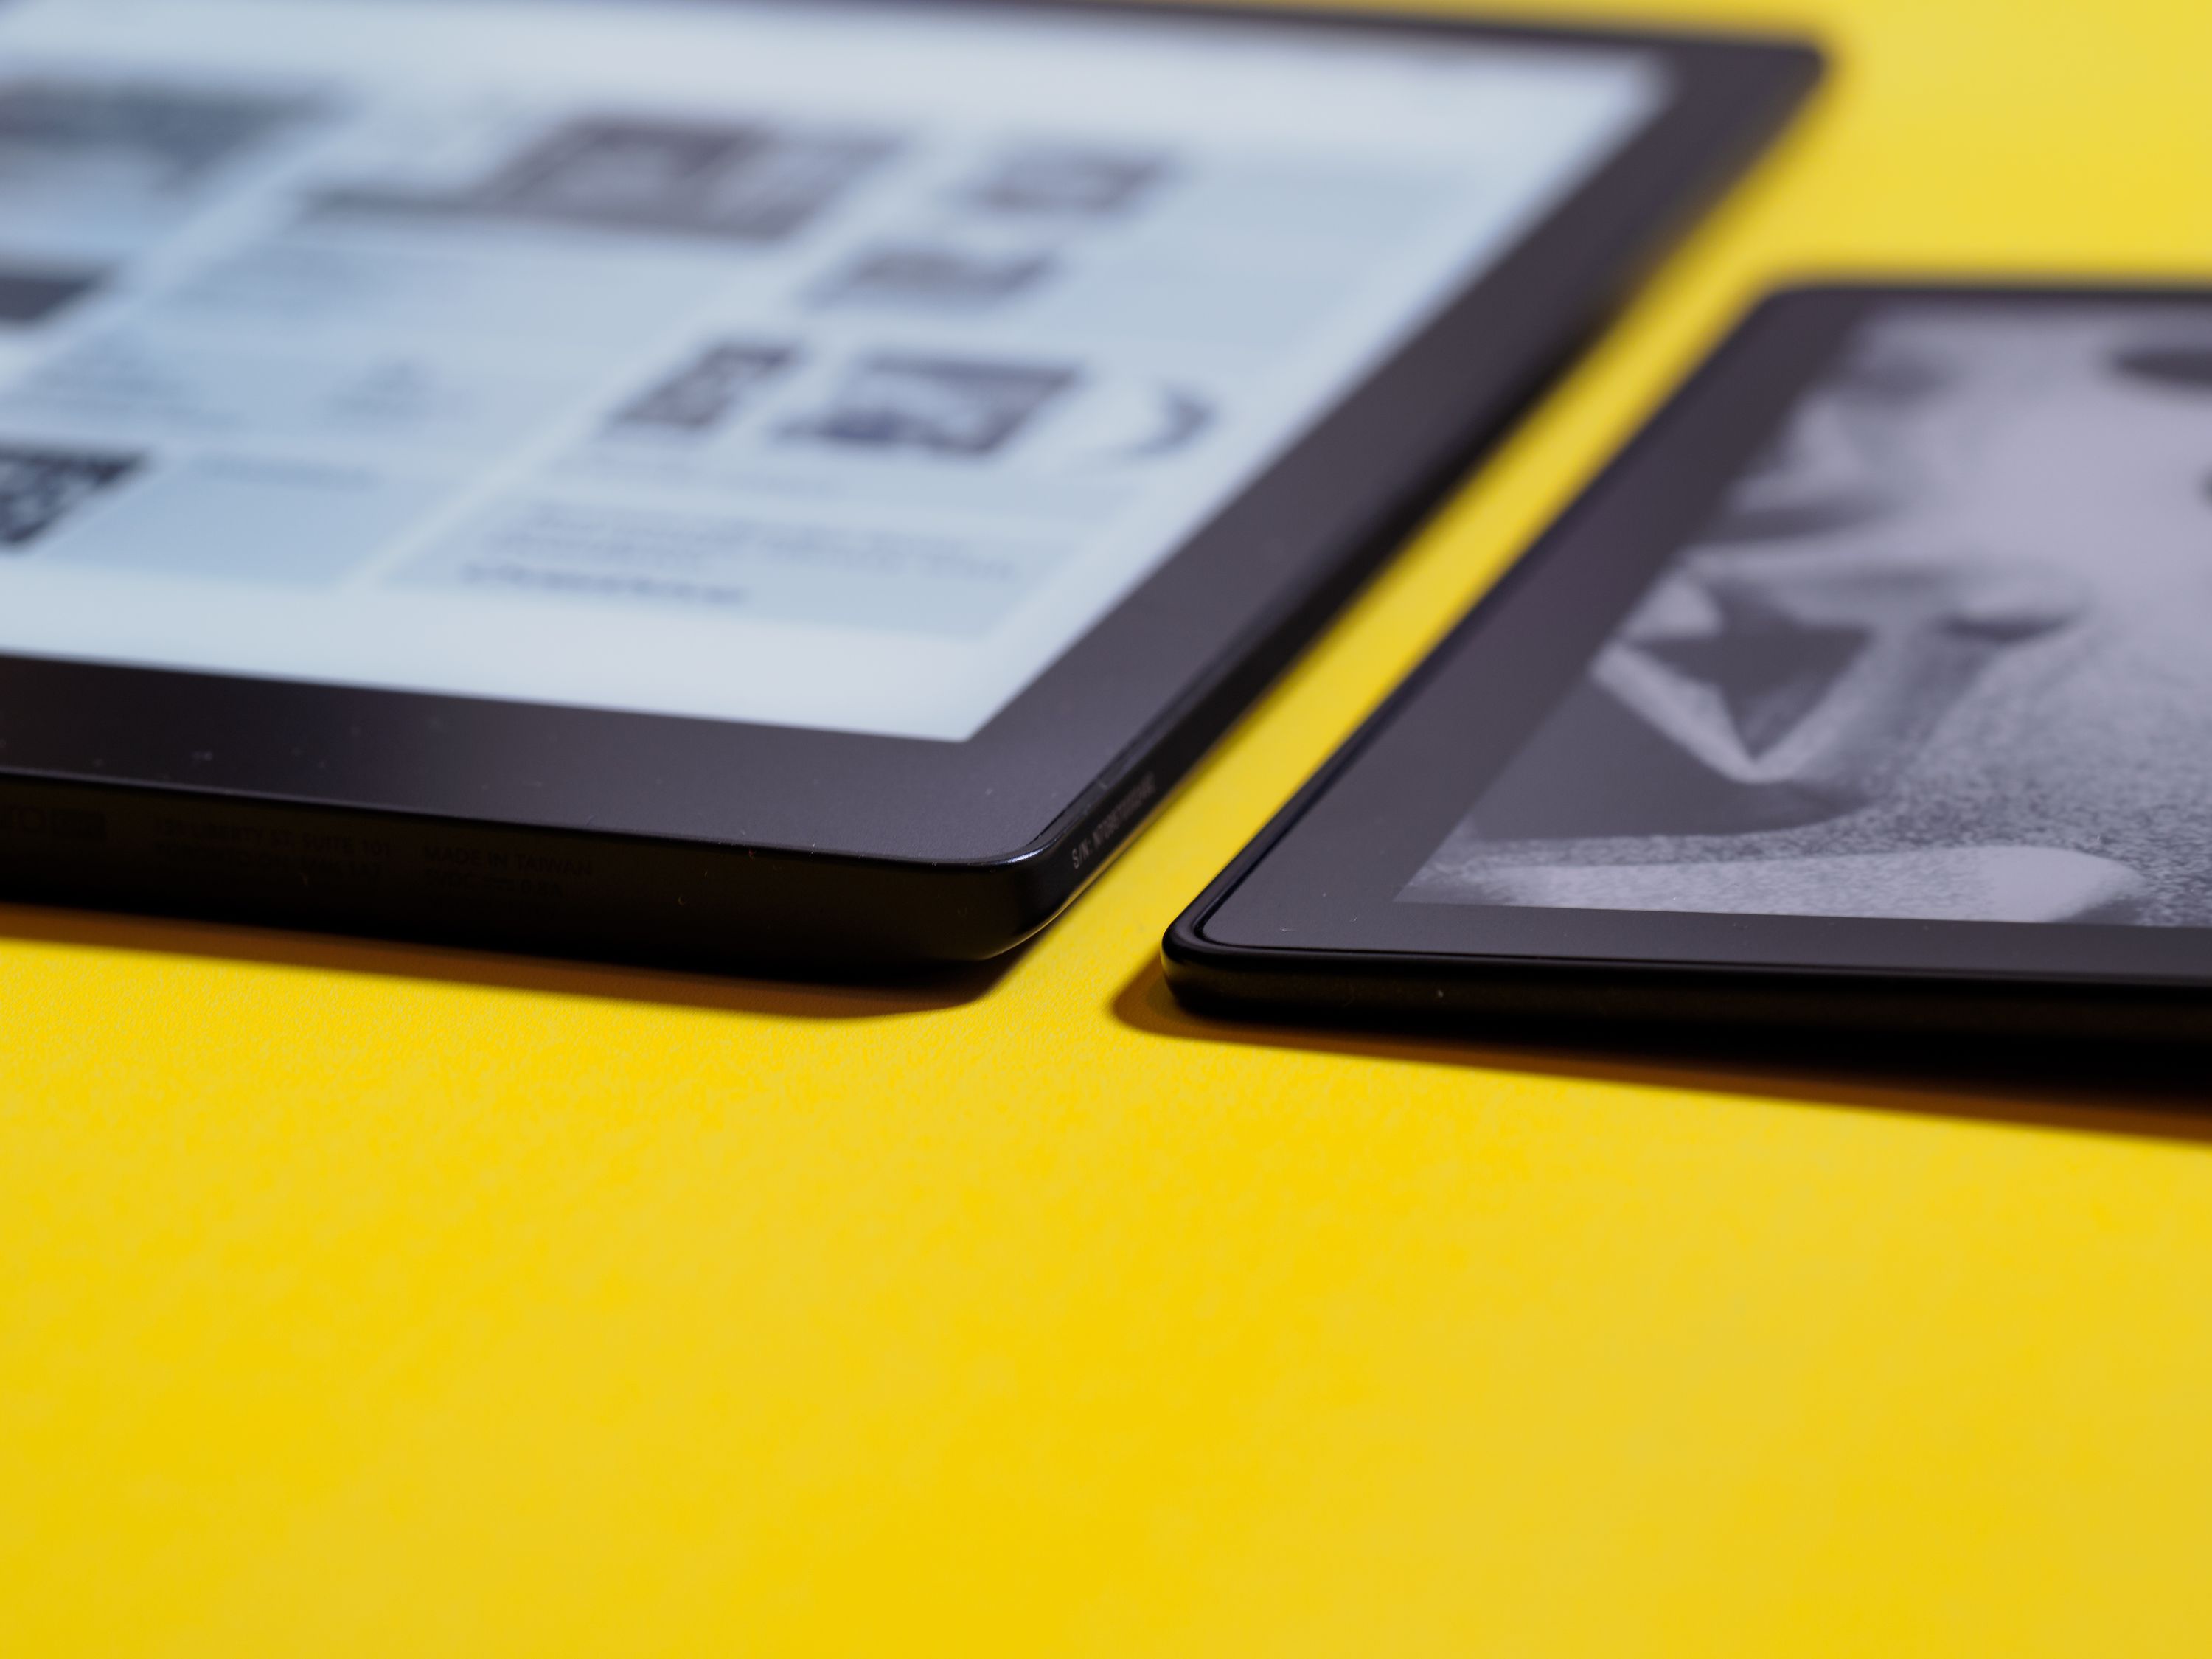 The Kindle Oasis (right) is not only significantly smaller in shape, it’s also thinner along its tapered edge. The button side is about the same thickness as the Aura One (left).